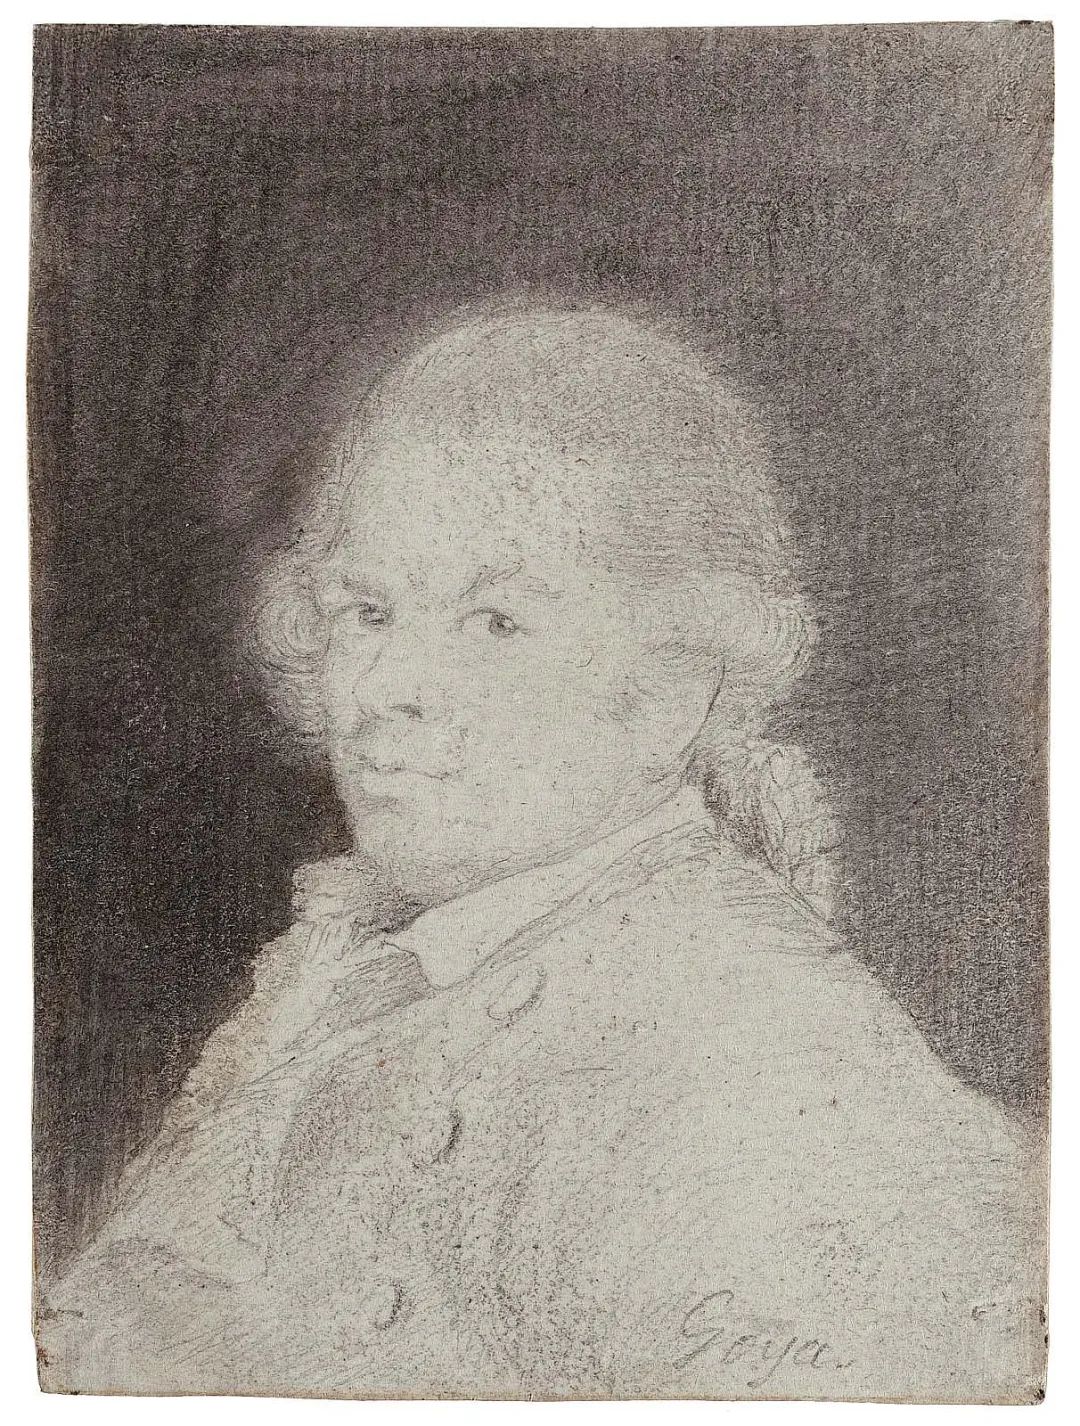 Francisco Goya (Self Portrait), Formerly attributed to: Francisco Goya y Lucientes (Spanish, 1746–1828), about 1783, Graphite heightened with black chalk, with stumping (rubbing) on cream laid paper Moderately textured, moderately thick, cream laid paper (4 horiz. chains with spacing of 27mm.)